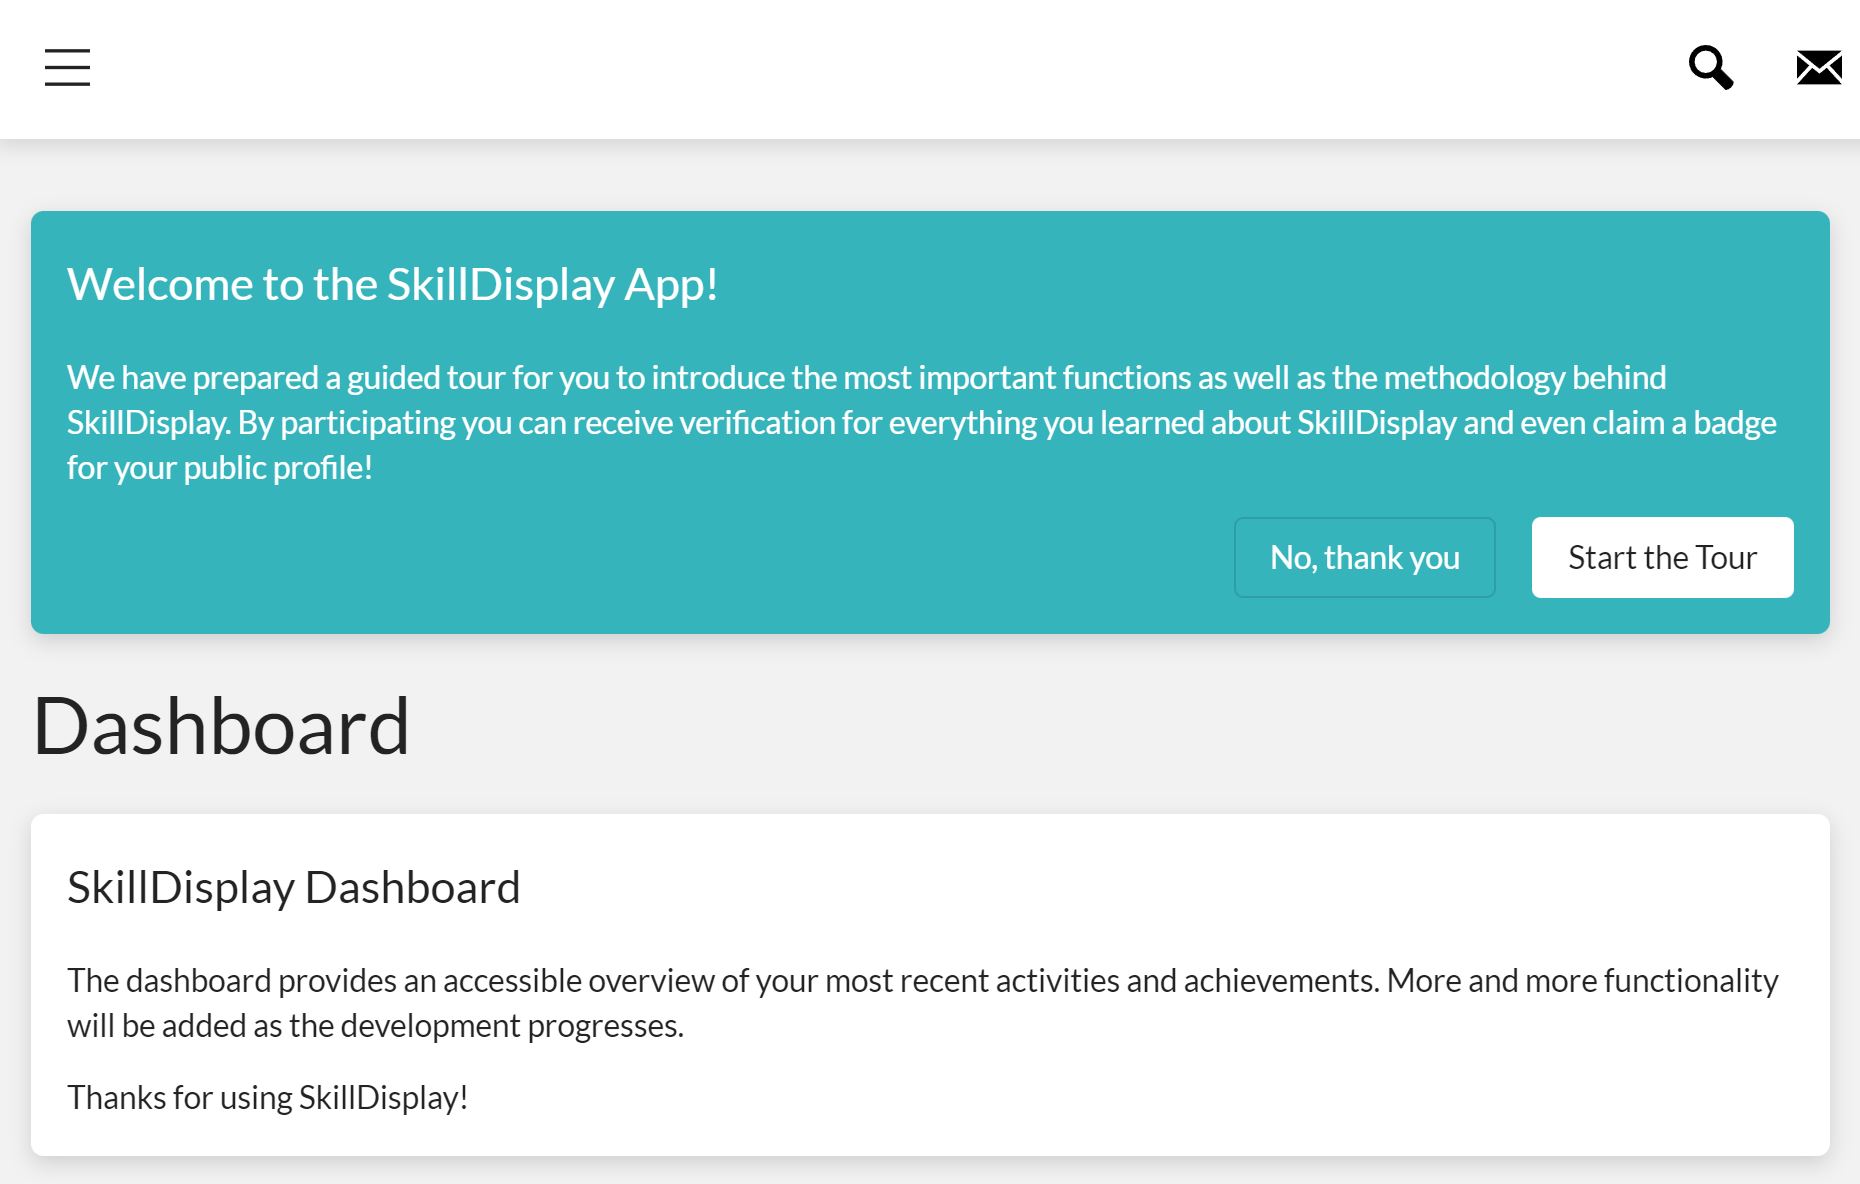 The SkillDisplay Dashboard showing a promt to start the tour through the app